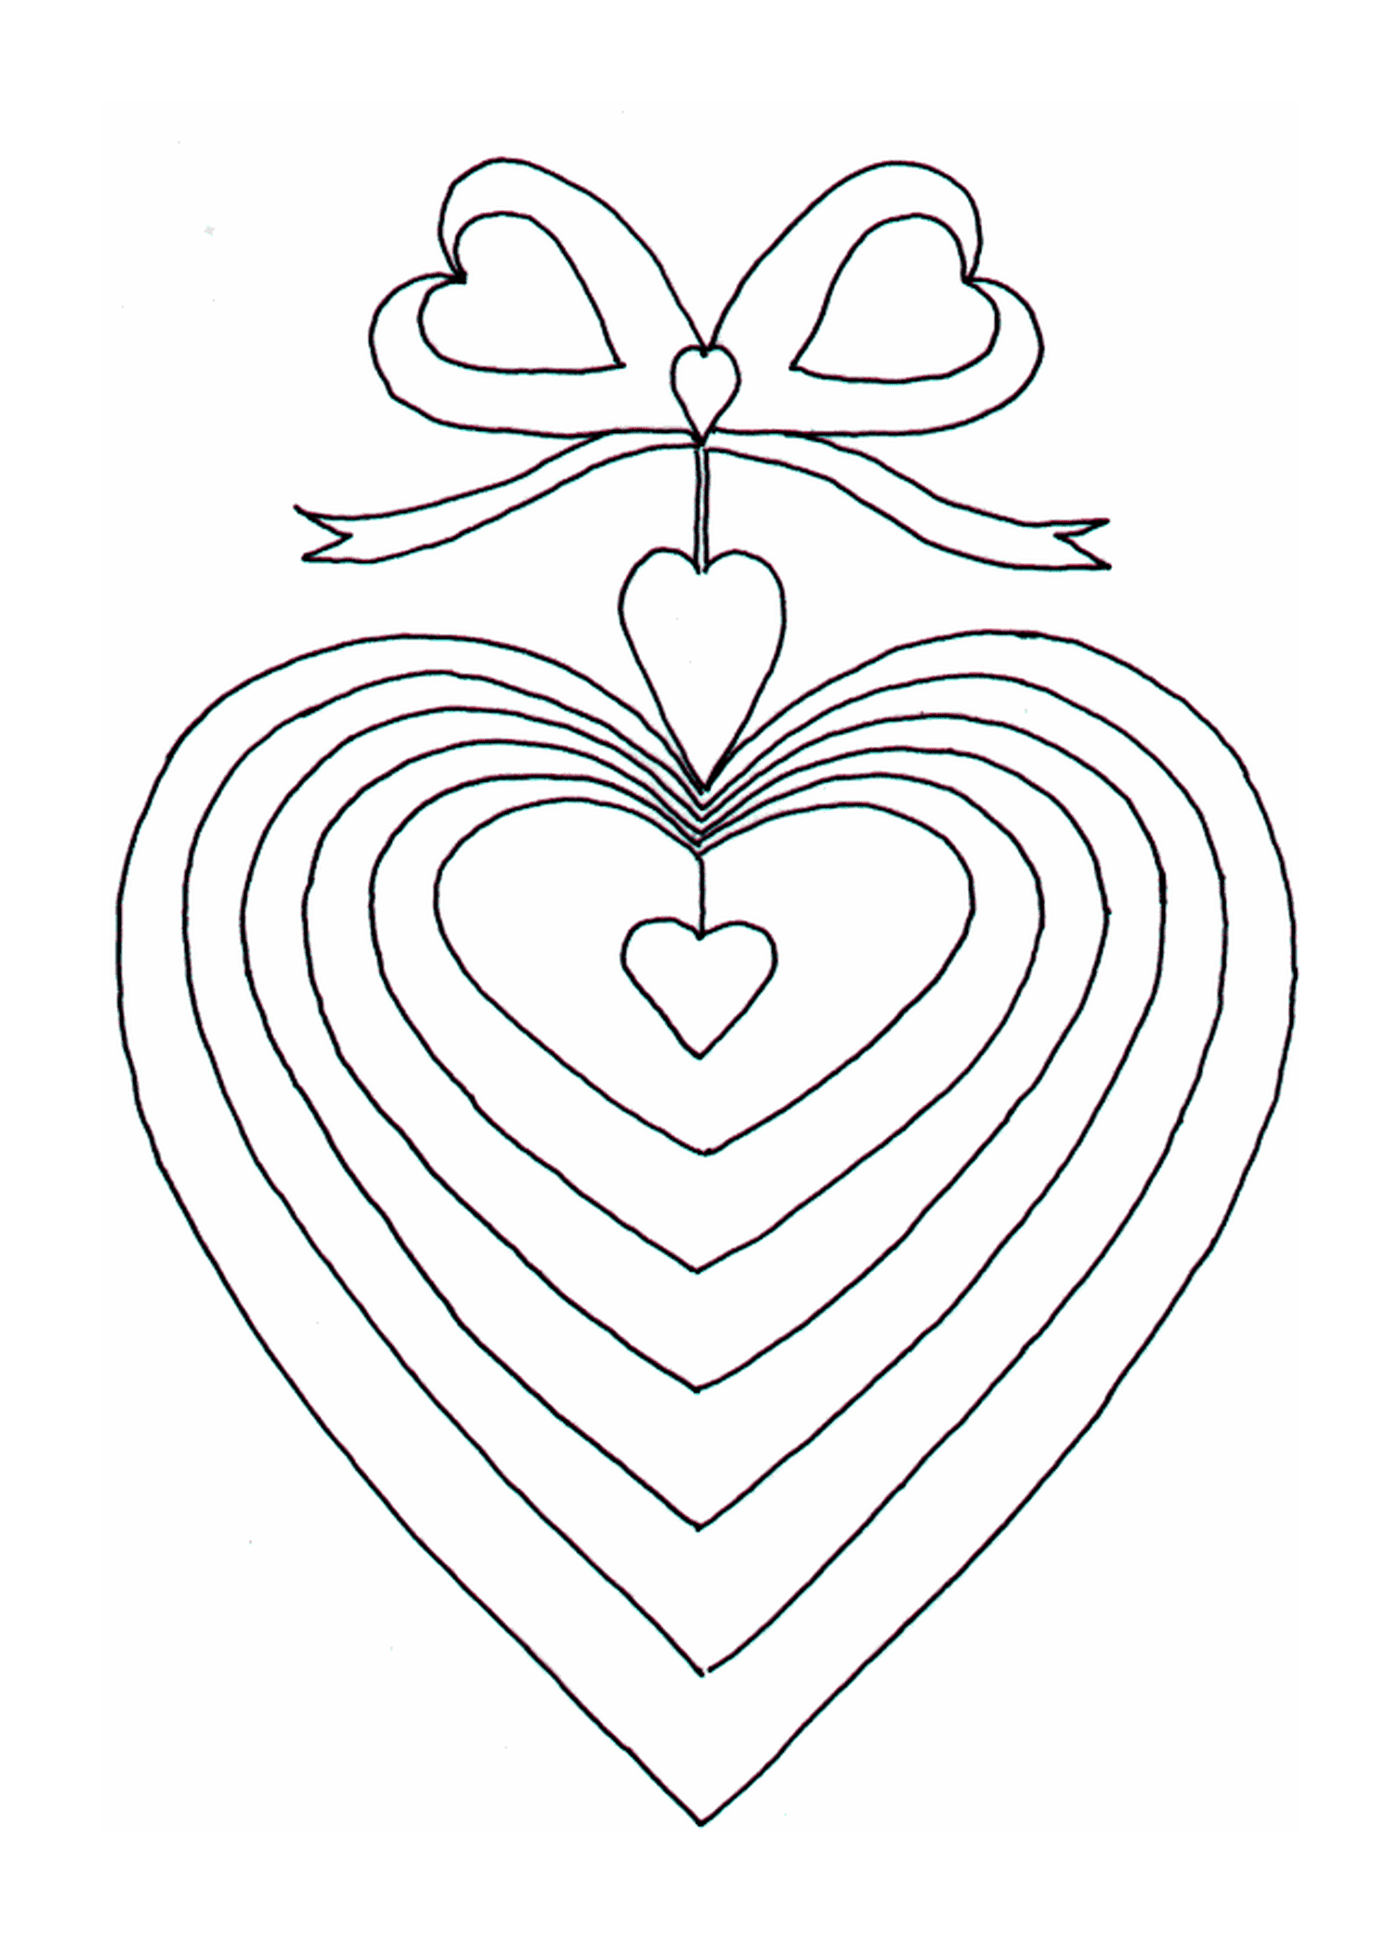  A heart with a ribbon 